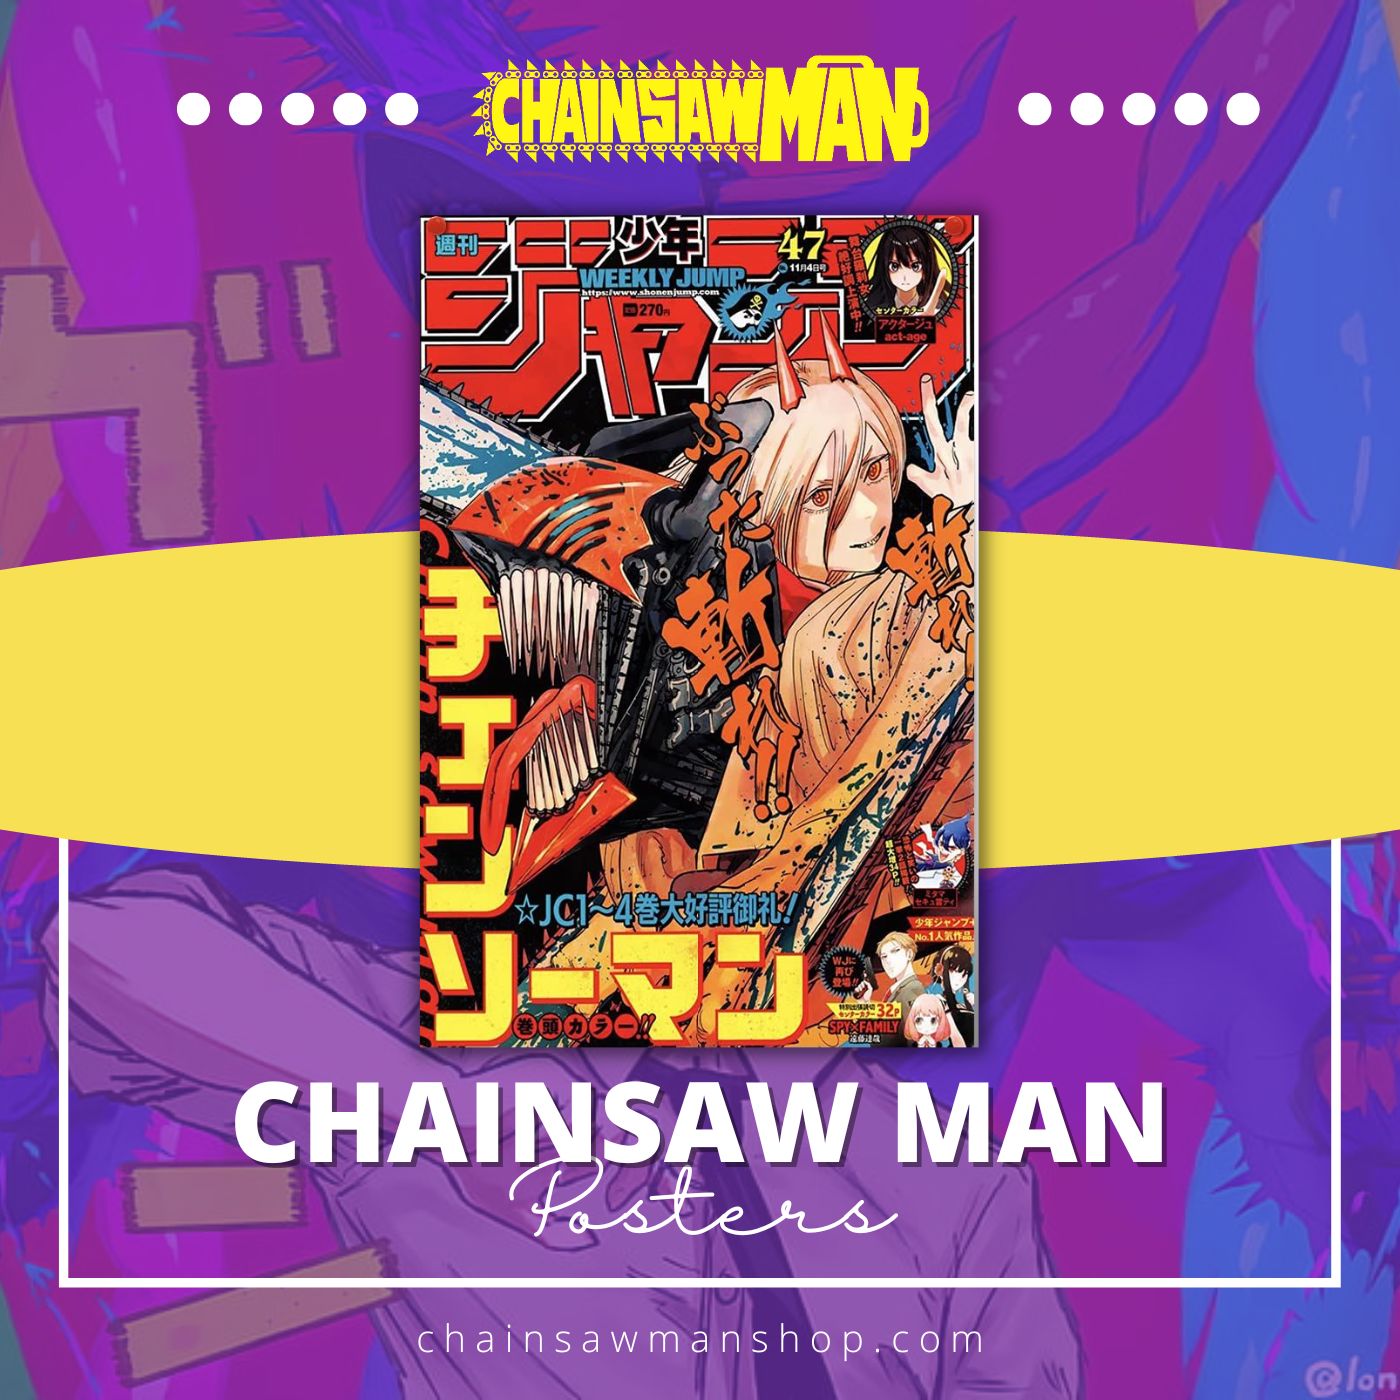 Pin by Shonen Jump Heroes on ChainsawMan